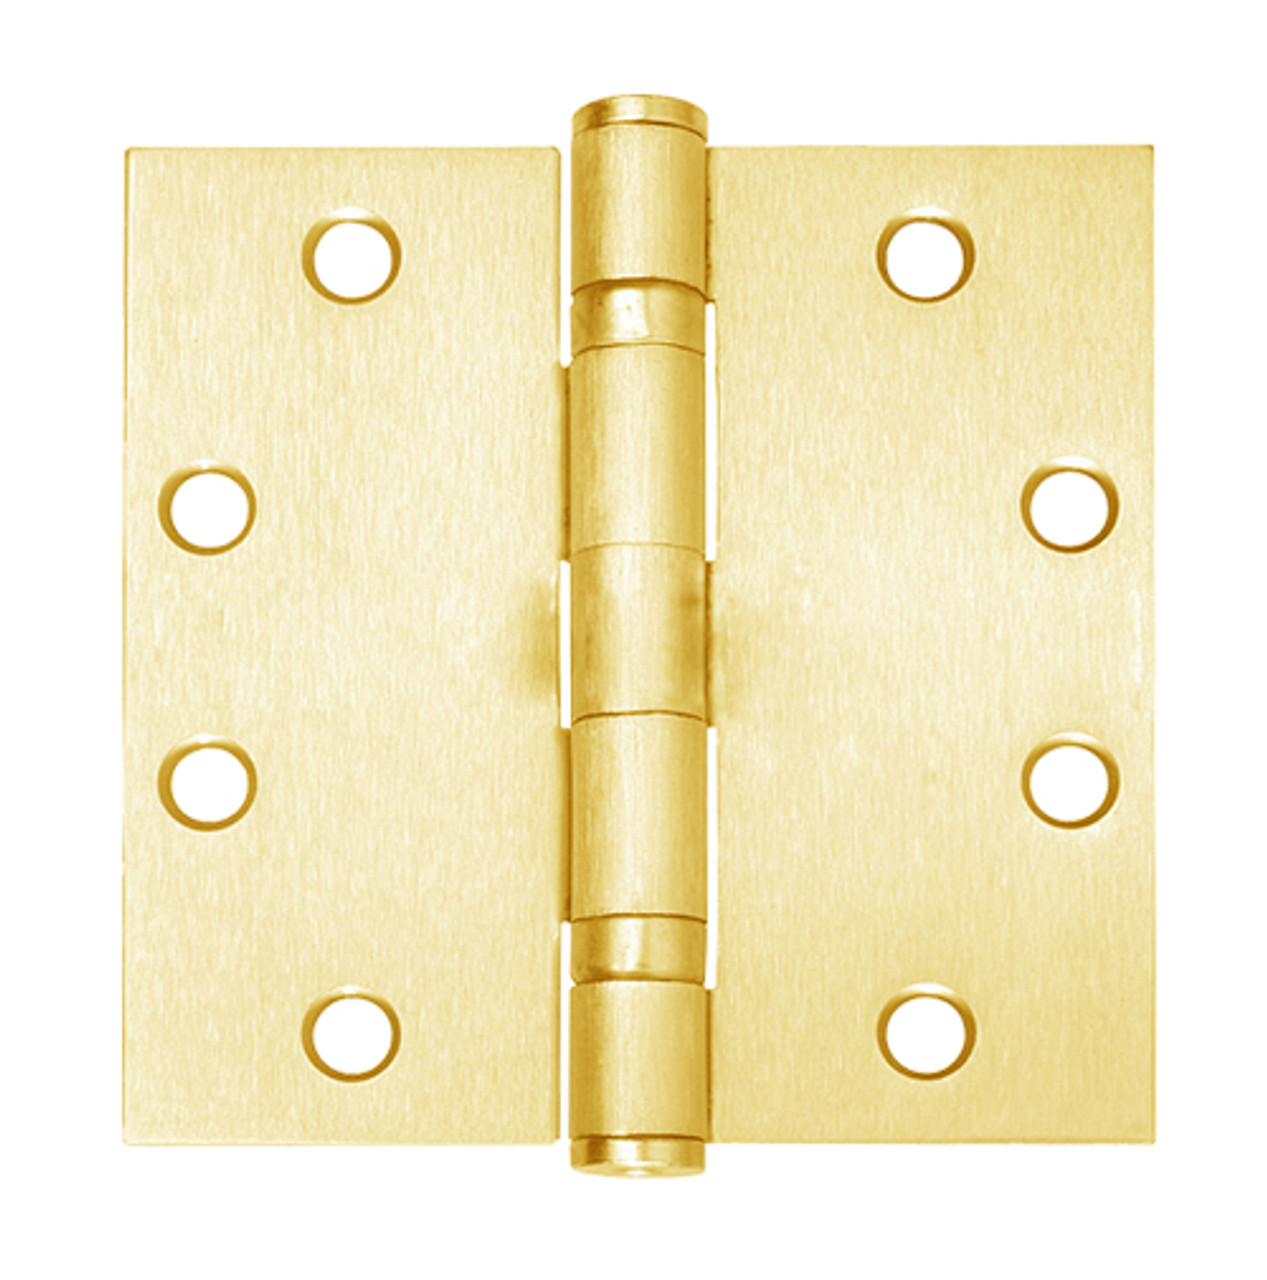 5BB1-4-5x4-605 IVES 5 Knuckle Ball Bearing Full Mortise Hinge in Bright Brass